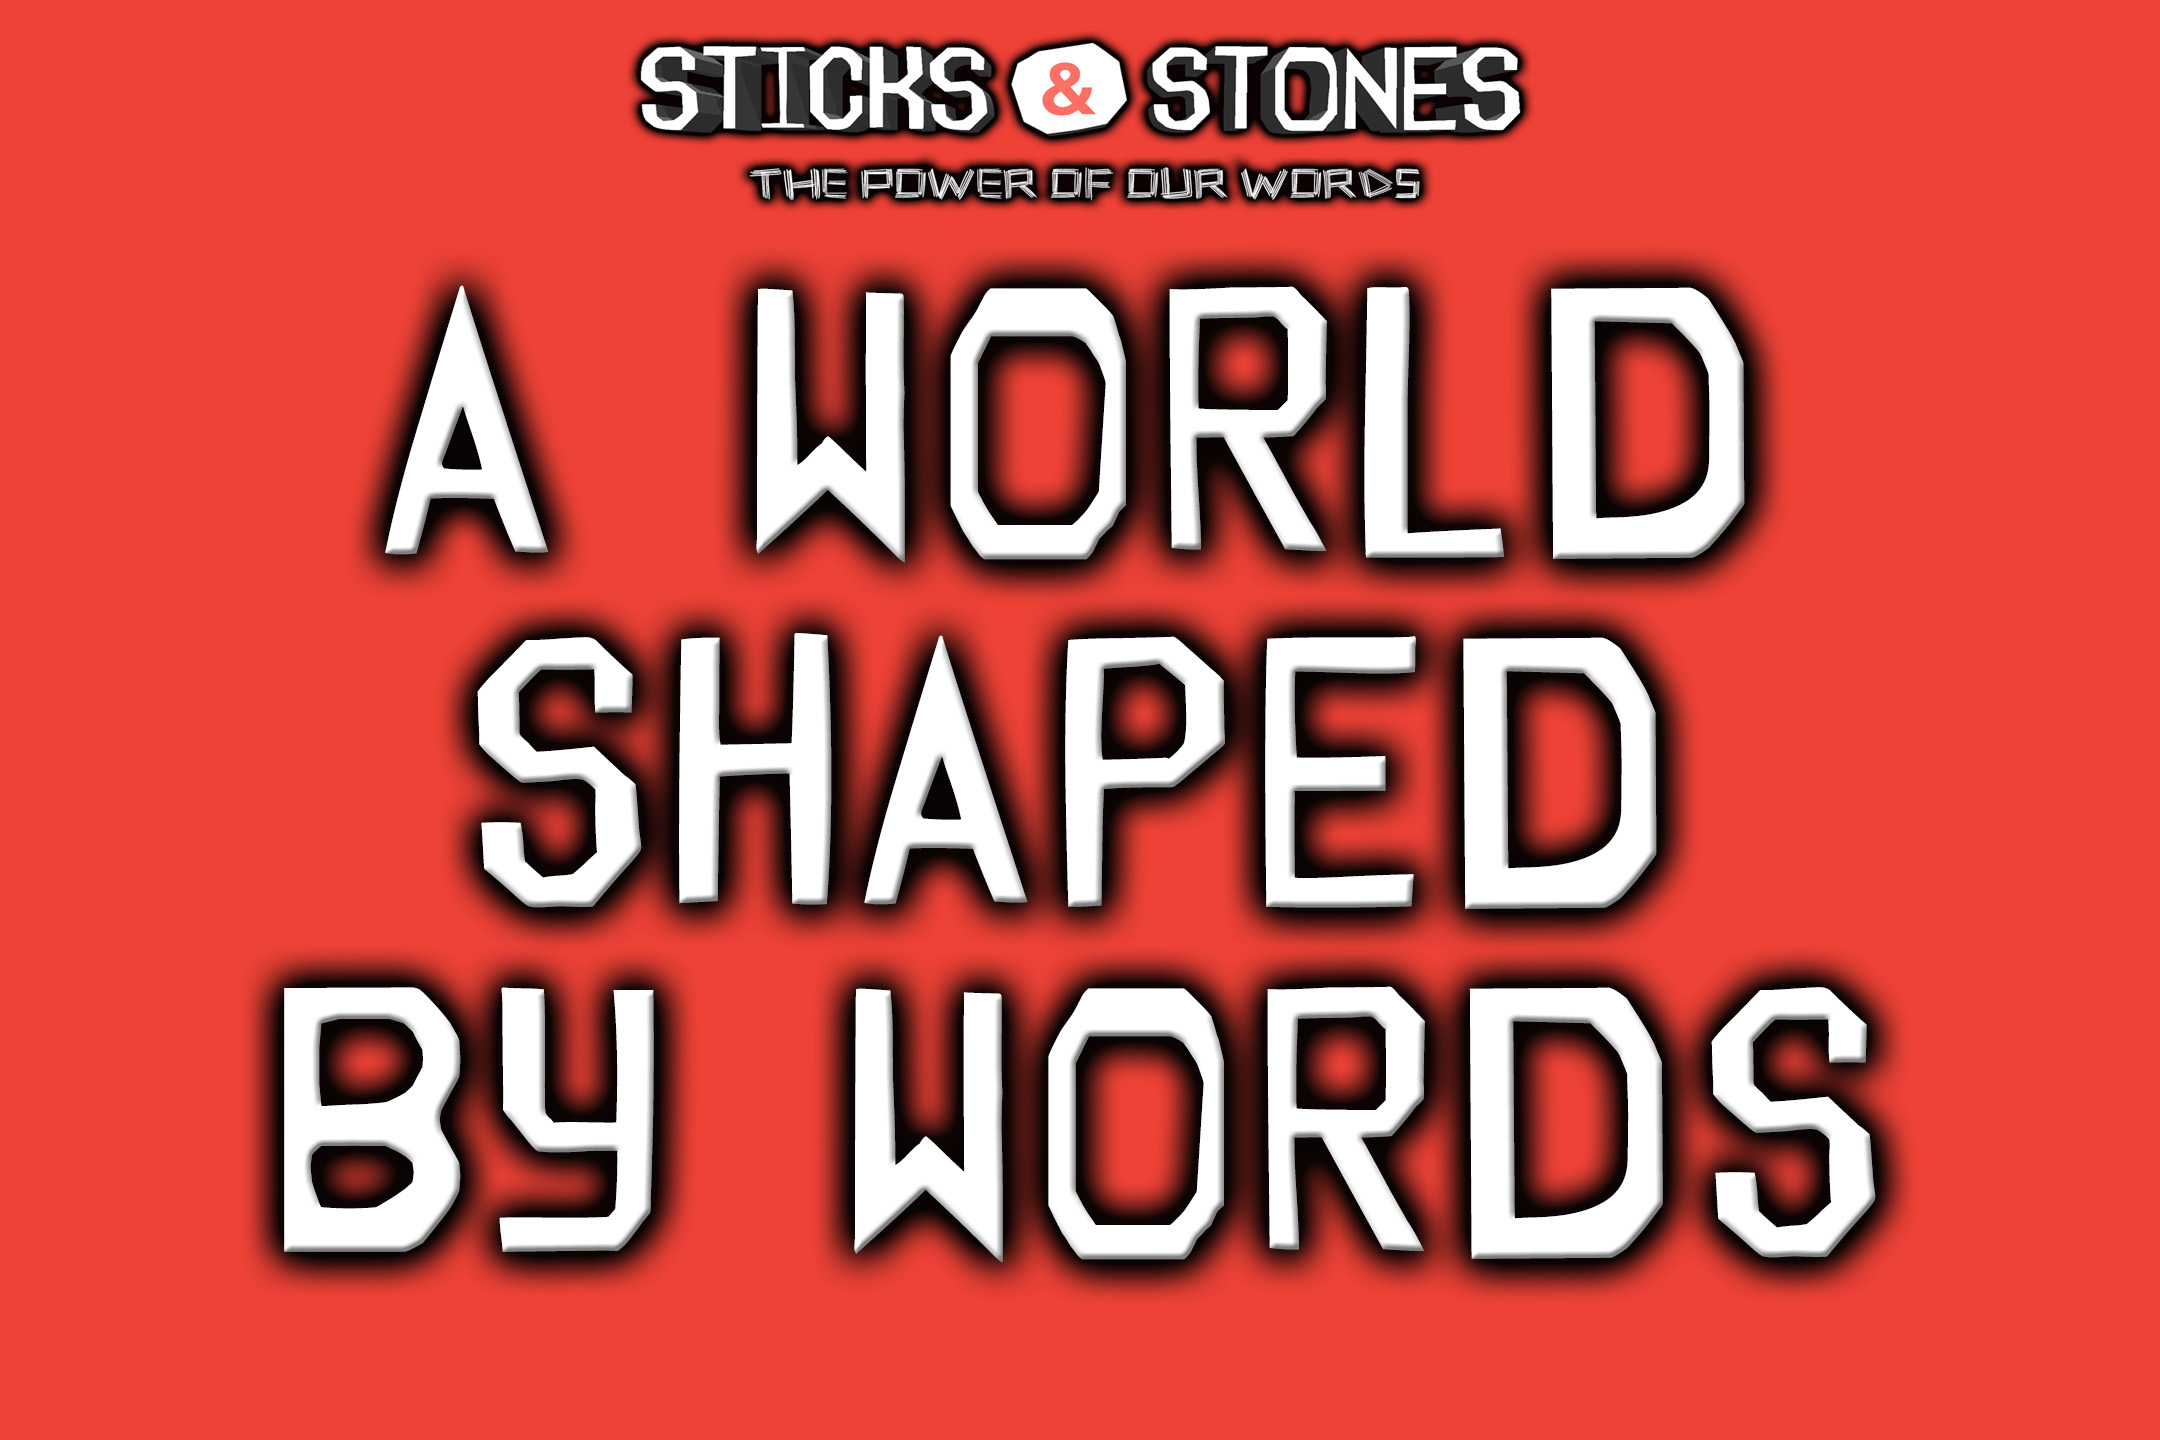 Pastor Huey: Sticks and Stones- The Power of Our Words | A World Shaped By Words (08/23/15)